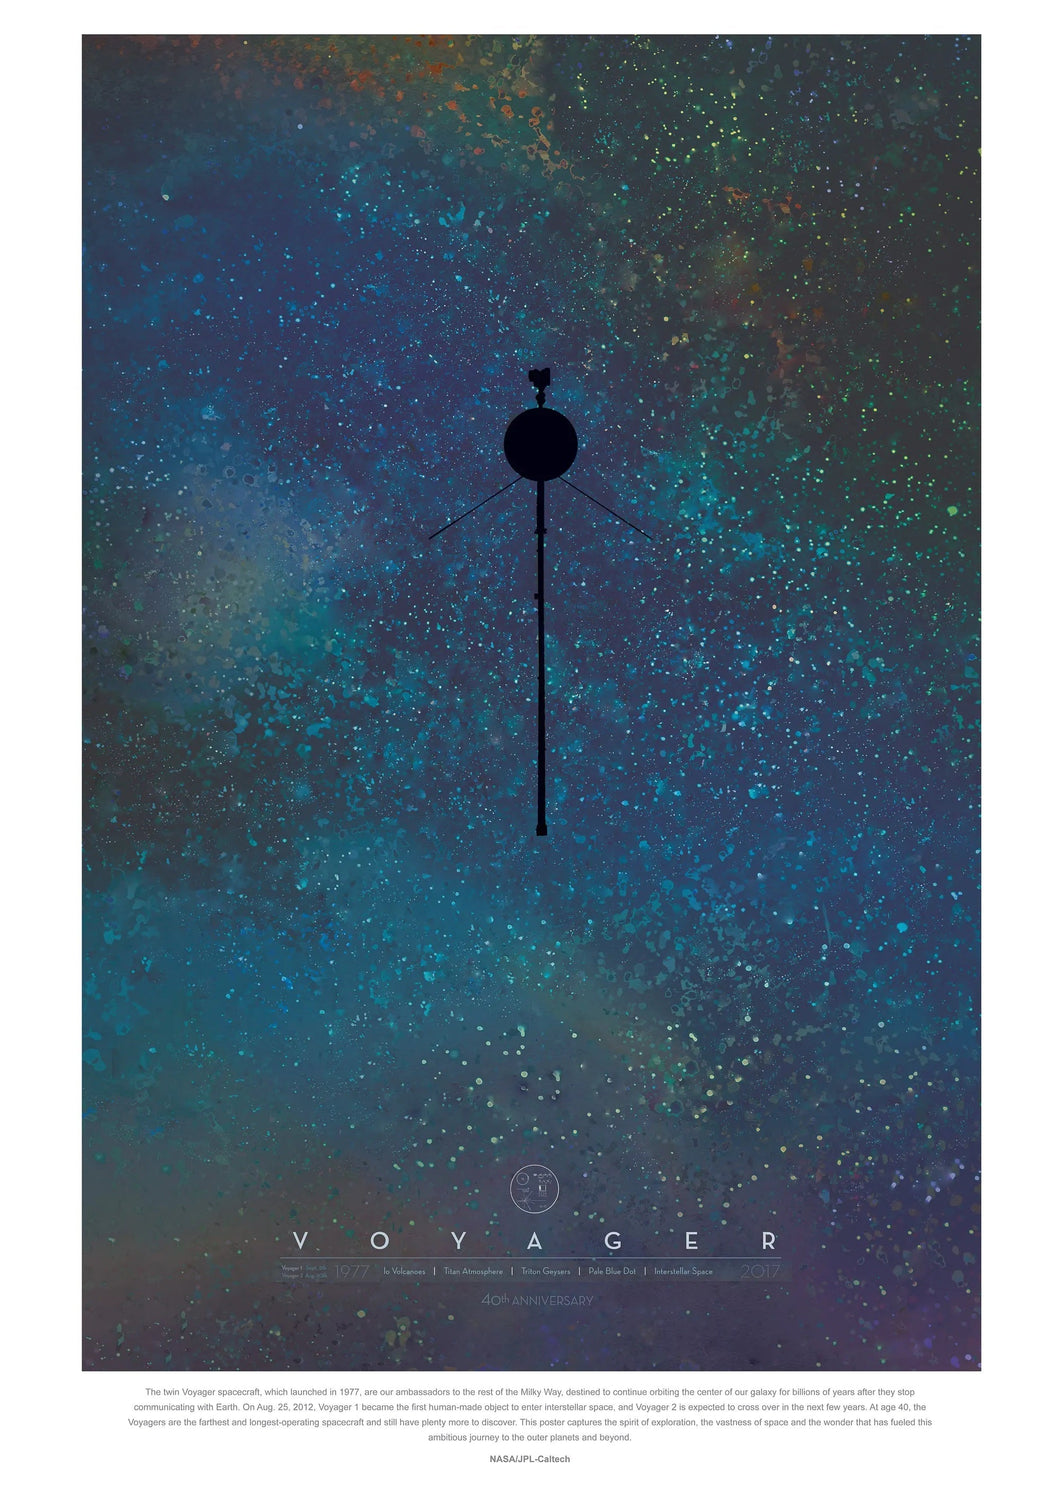 Voyager 40th anniversary poster